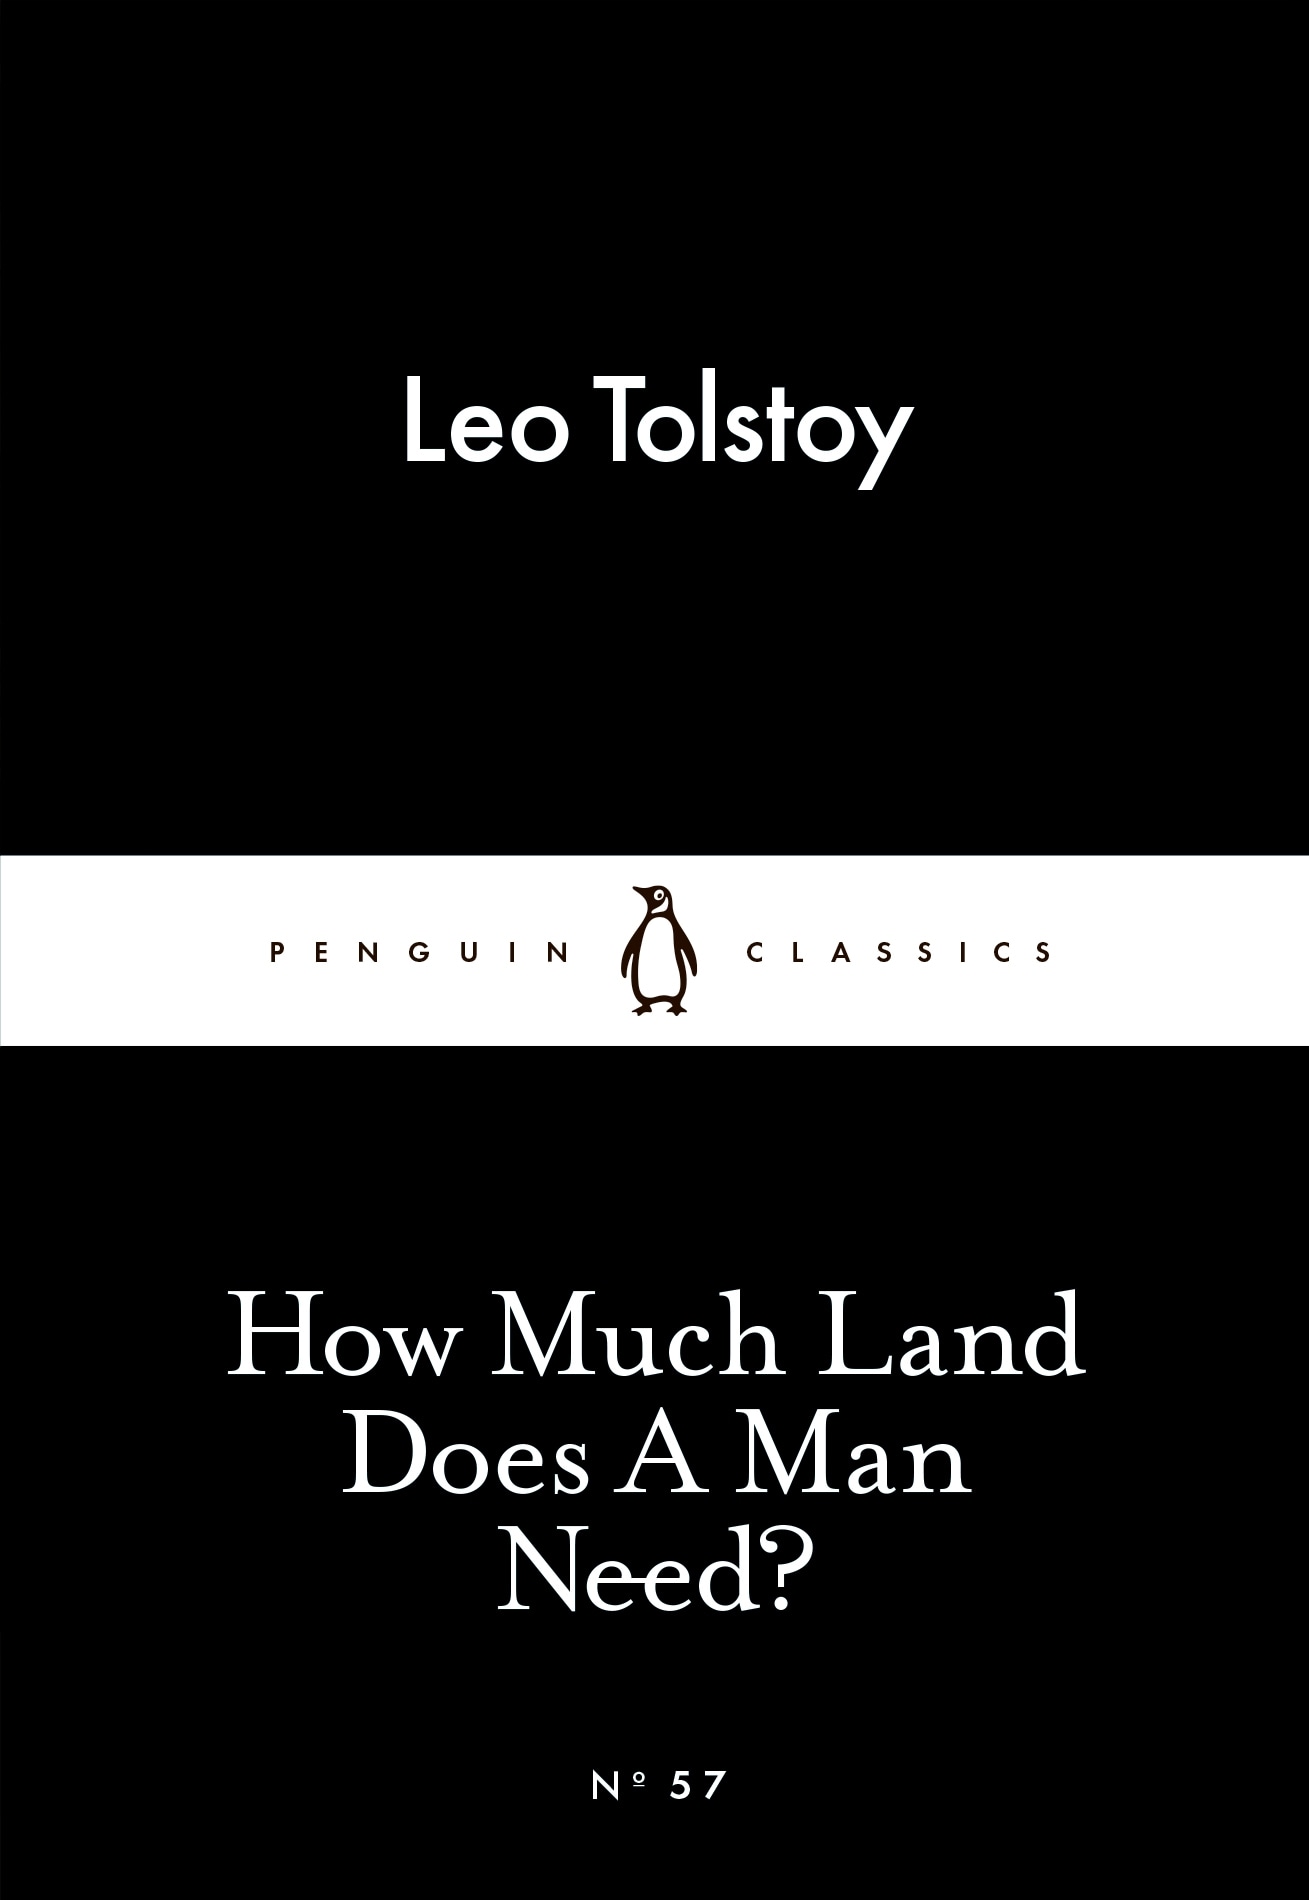 Book “How Much Land Does A Man Need?” by Leo Tolstoy — February 26, 2015